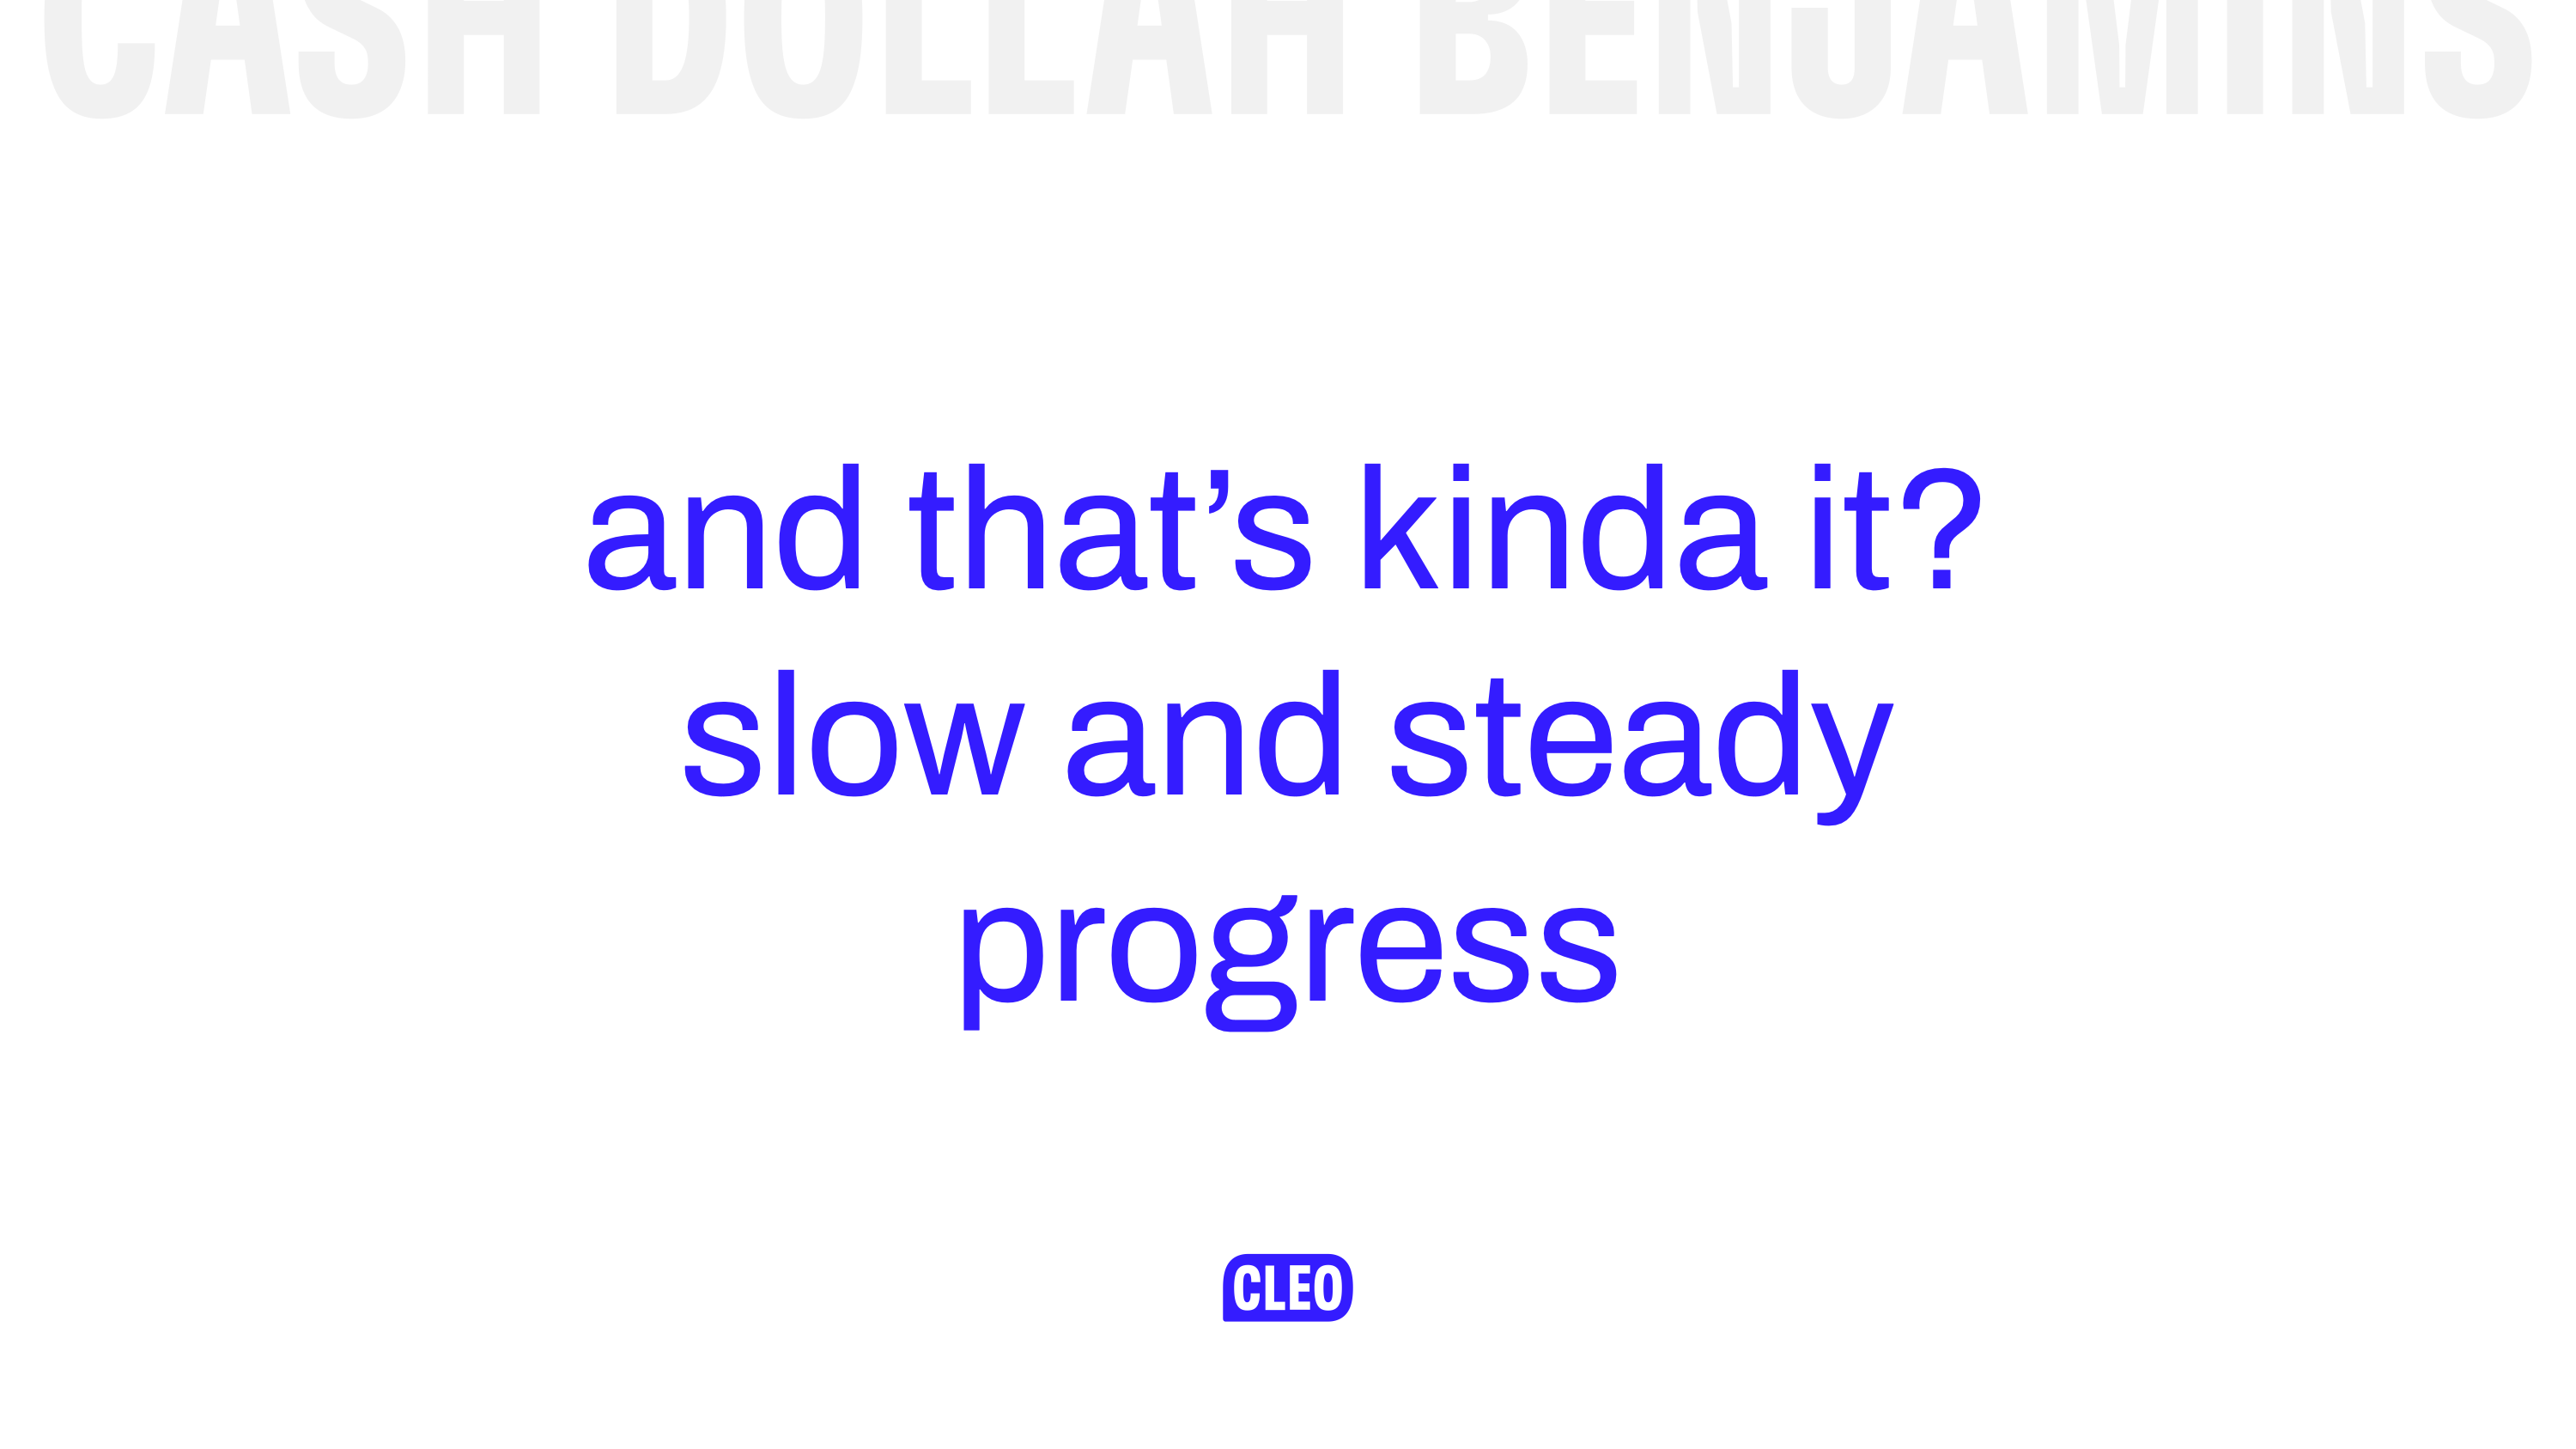 text: and that's kinda it? slow and steady progress